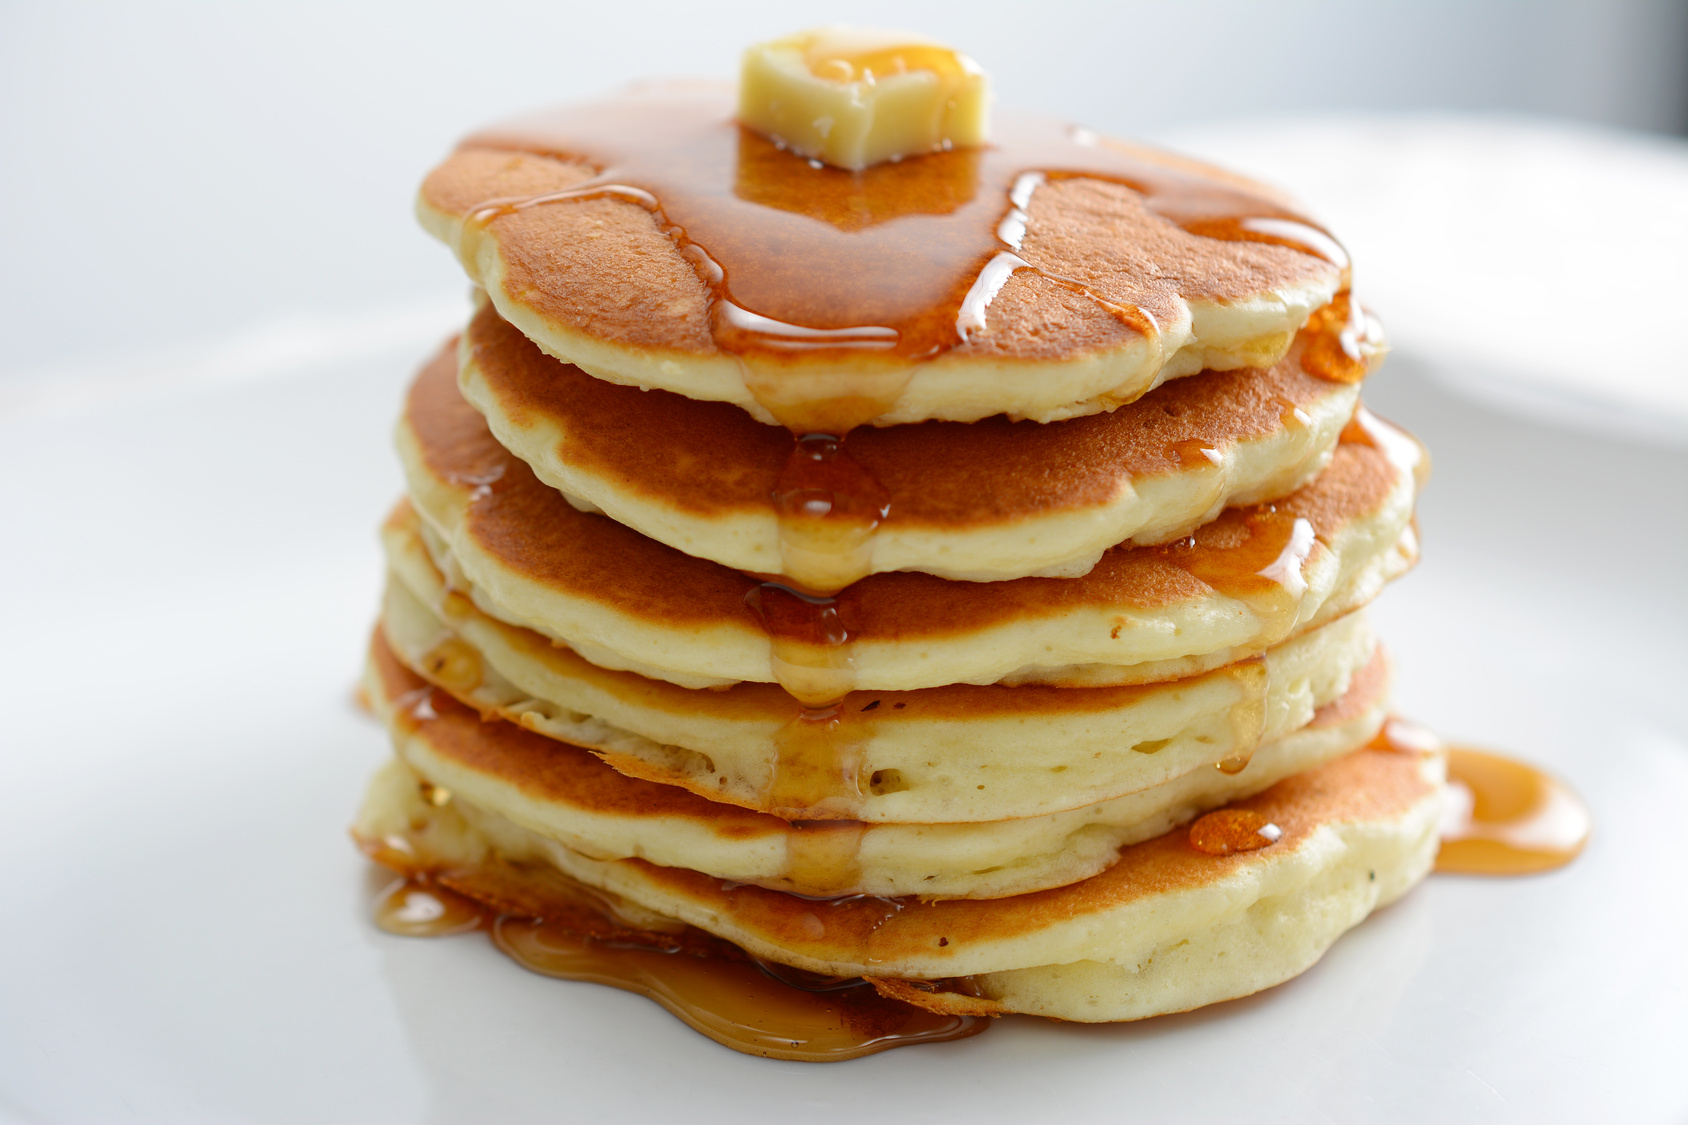 IHOP - Does anybody else suddenly have pancakes on the brain?